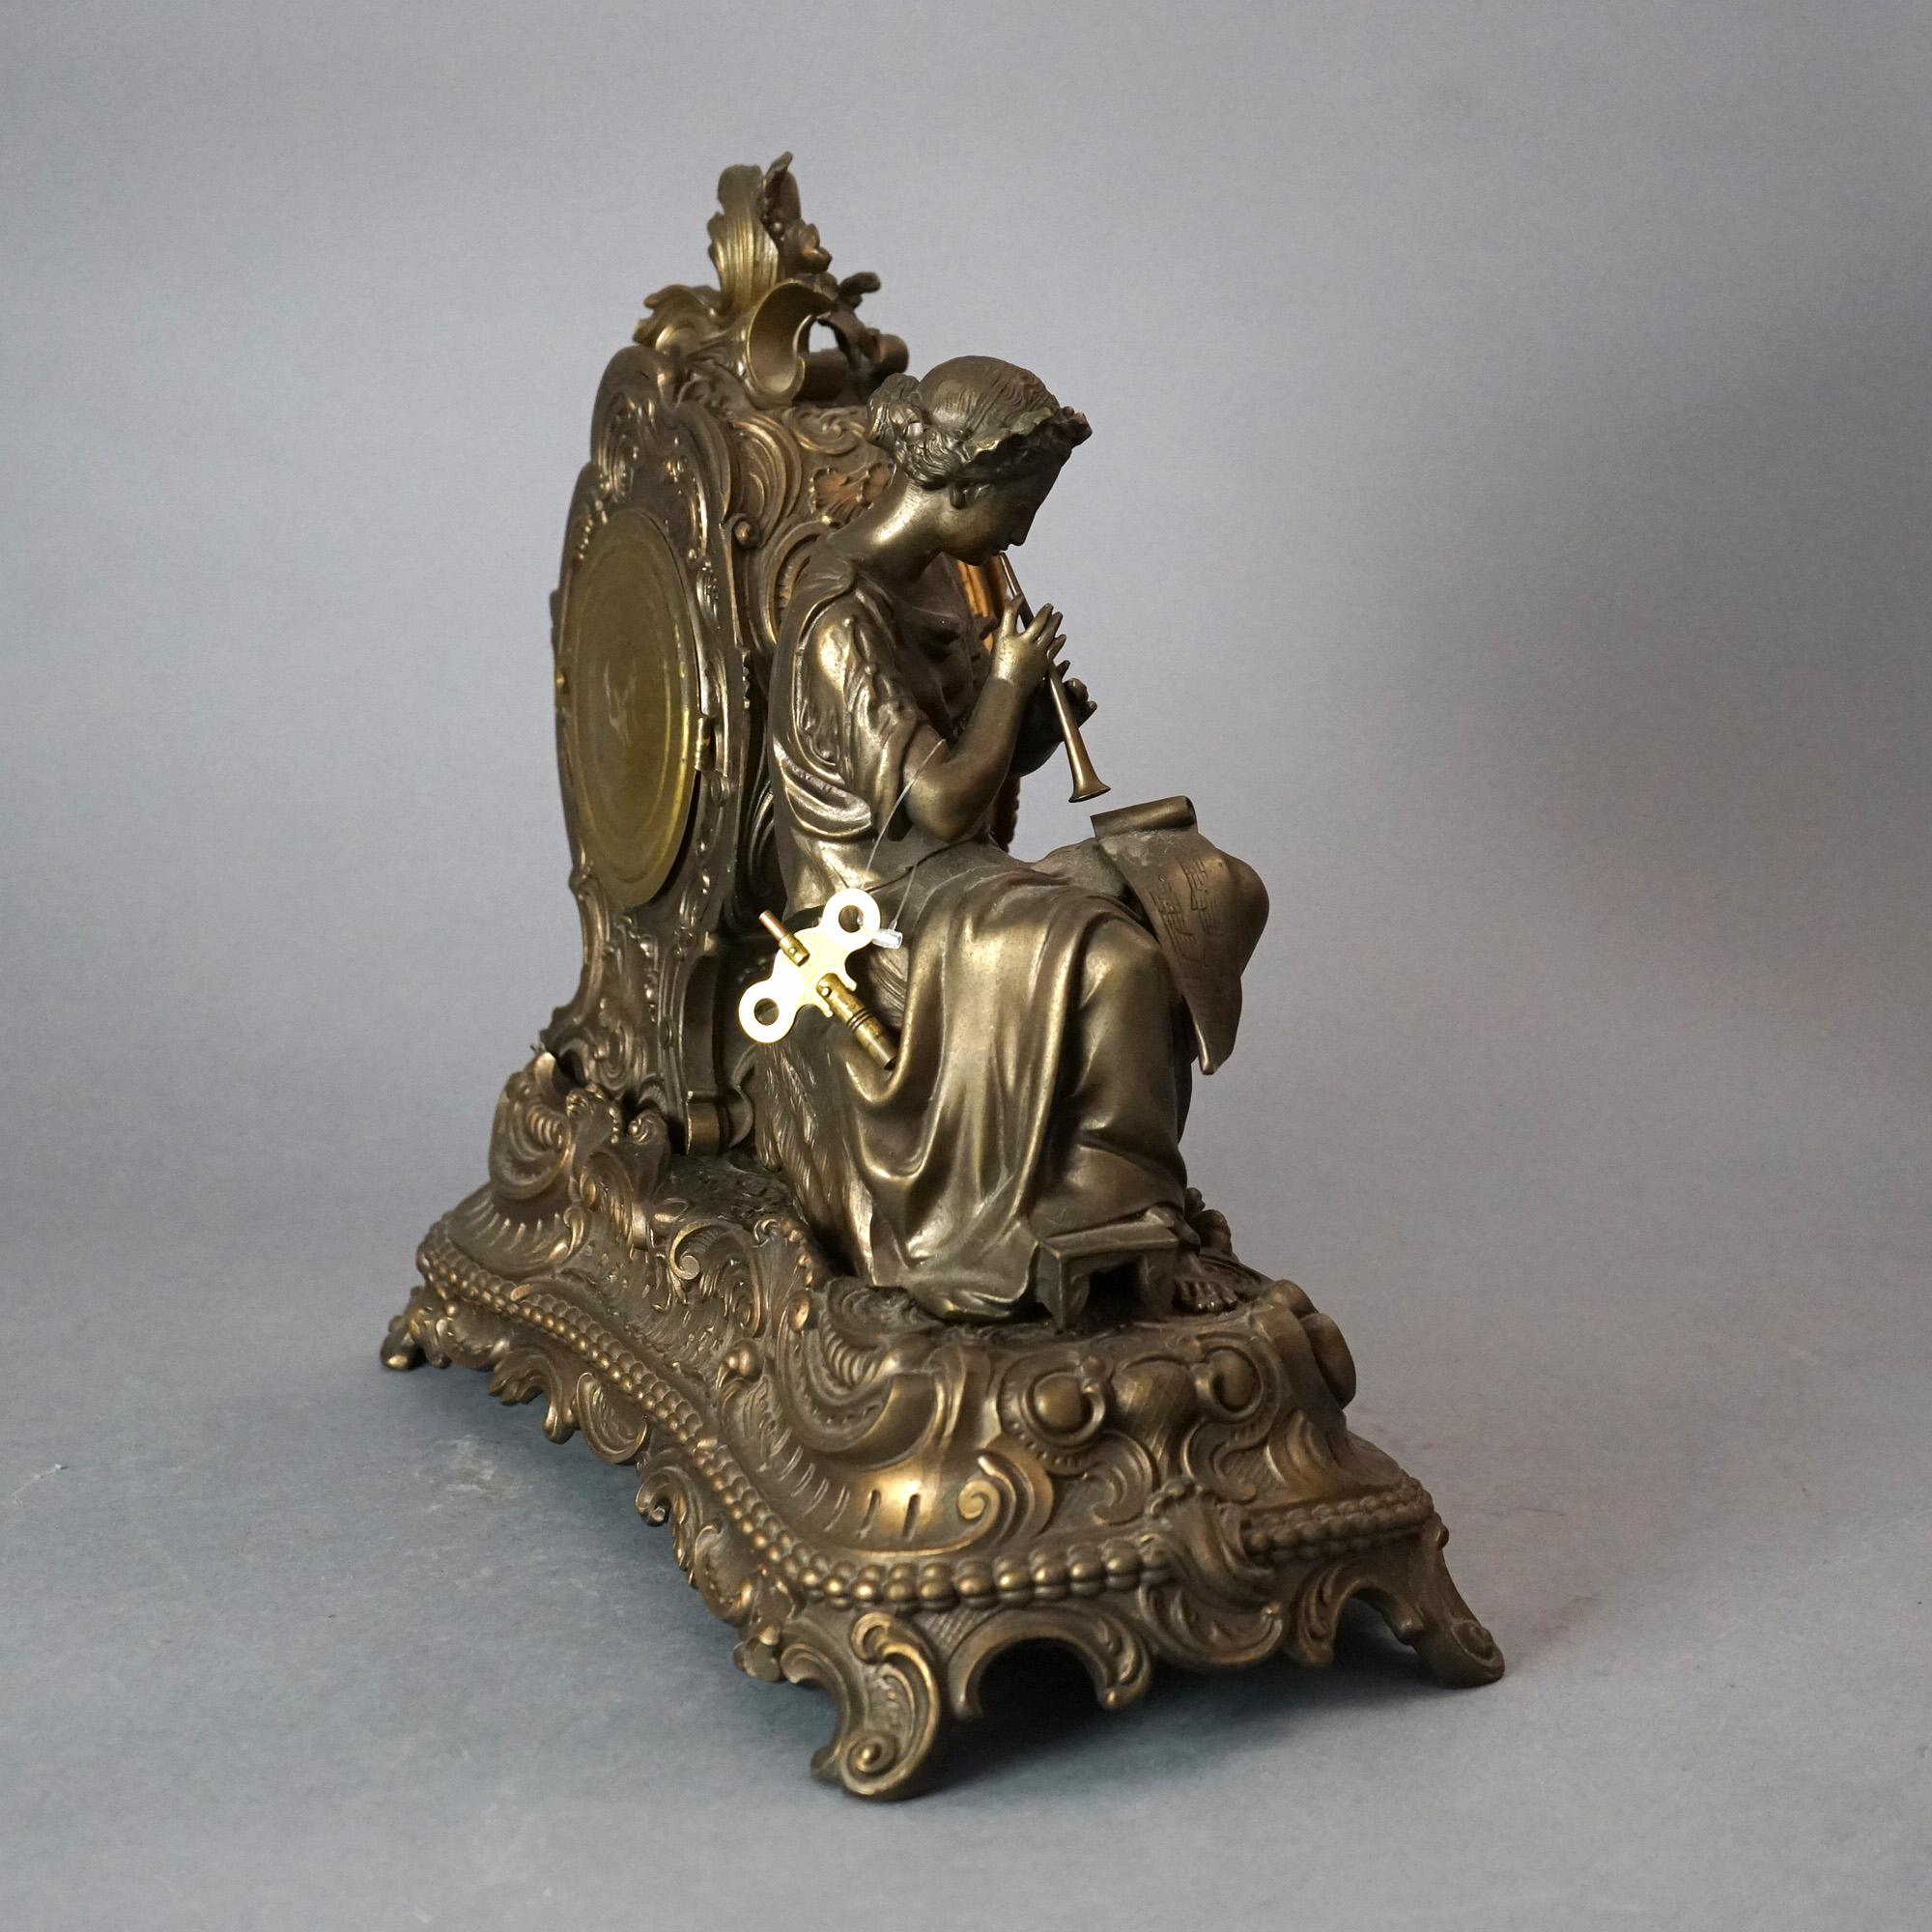 Antique Ansonia Bronzed Metal Figural Mantel Clock with Classical Woman C1890 10